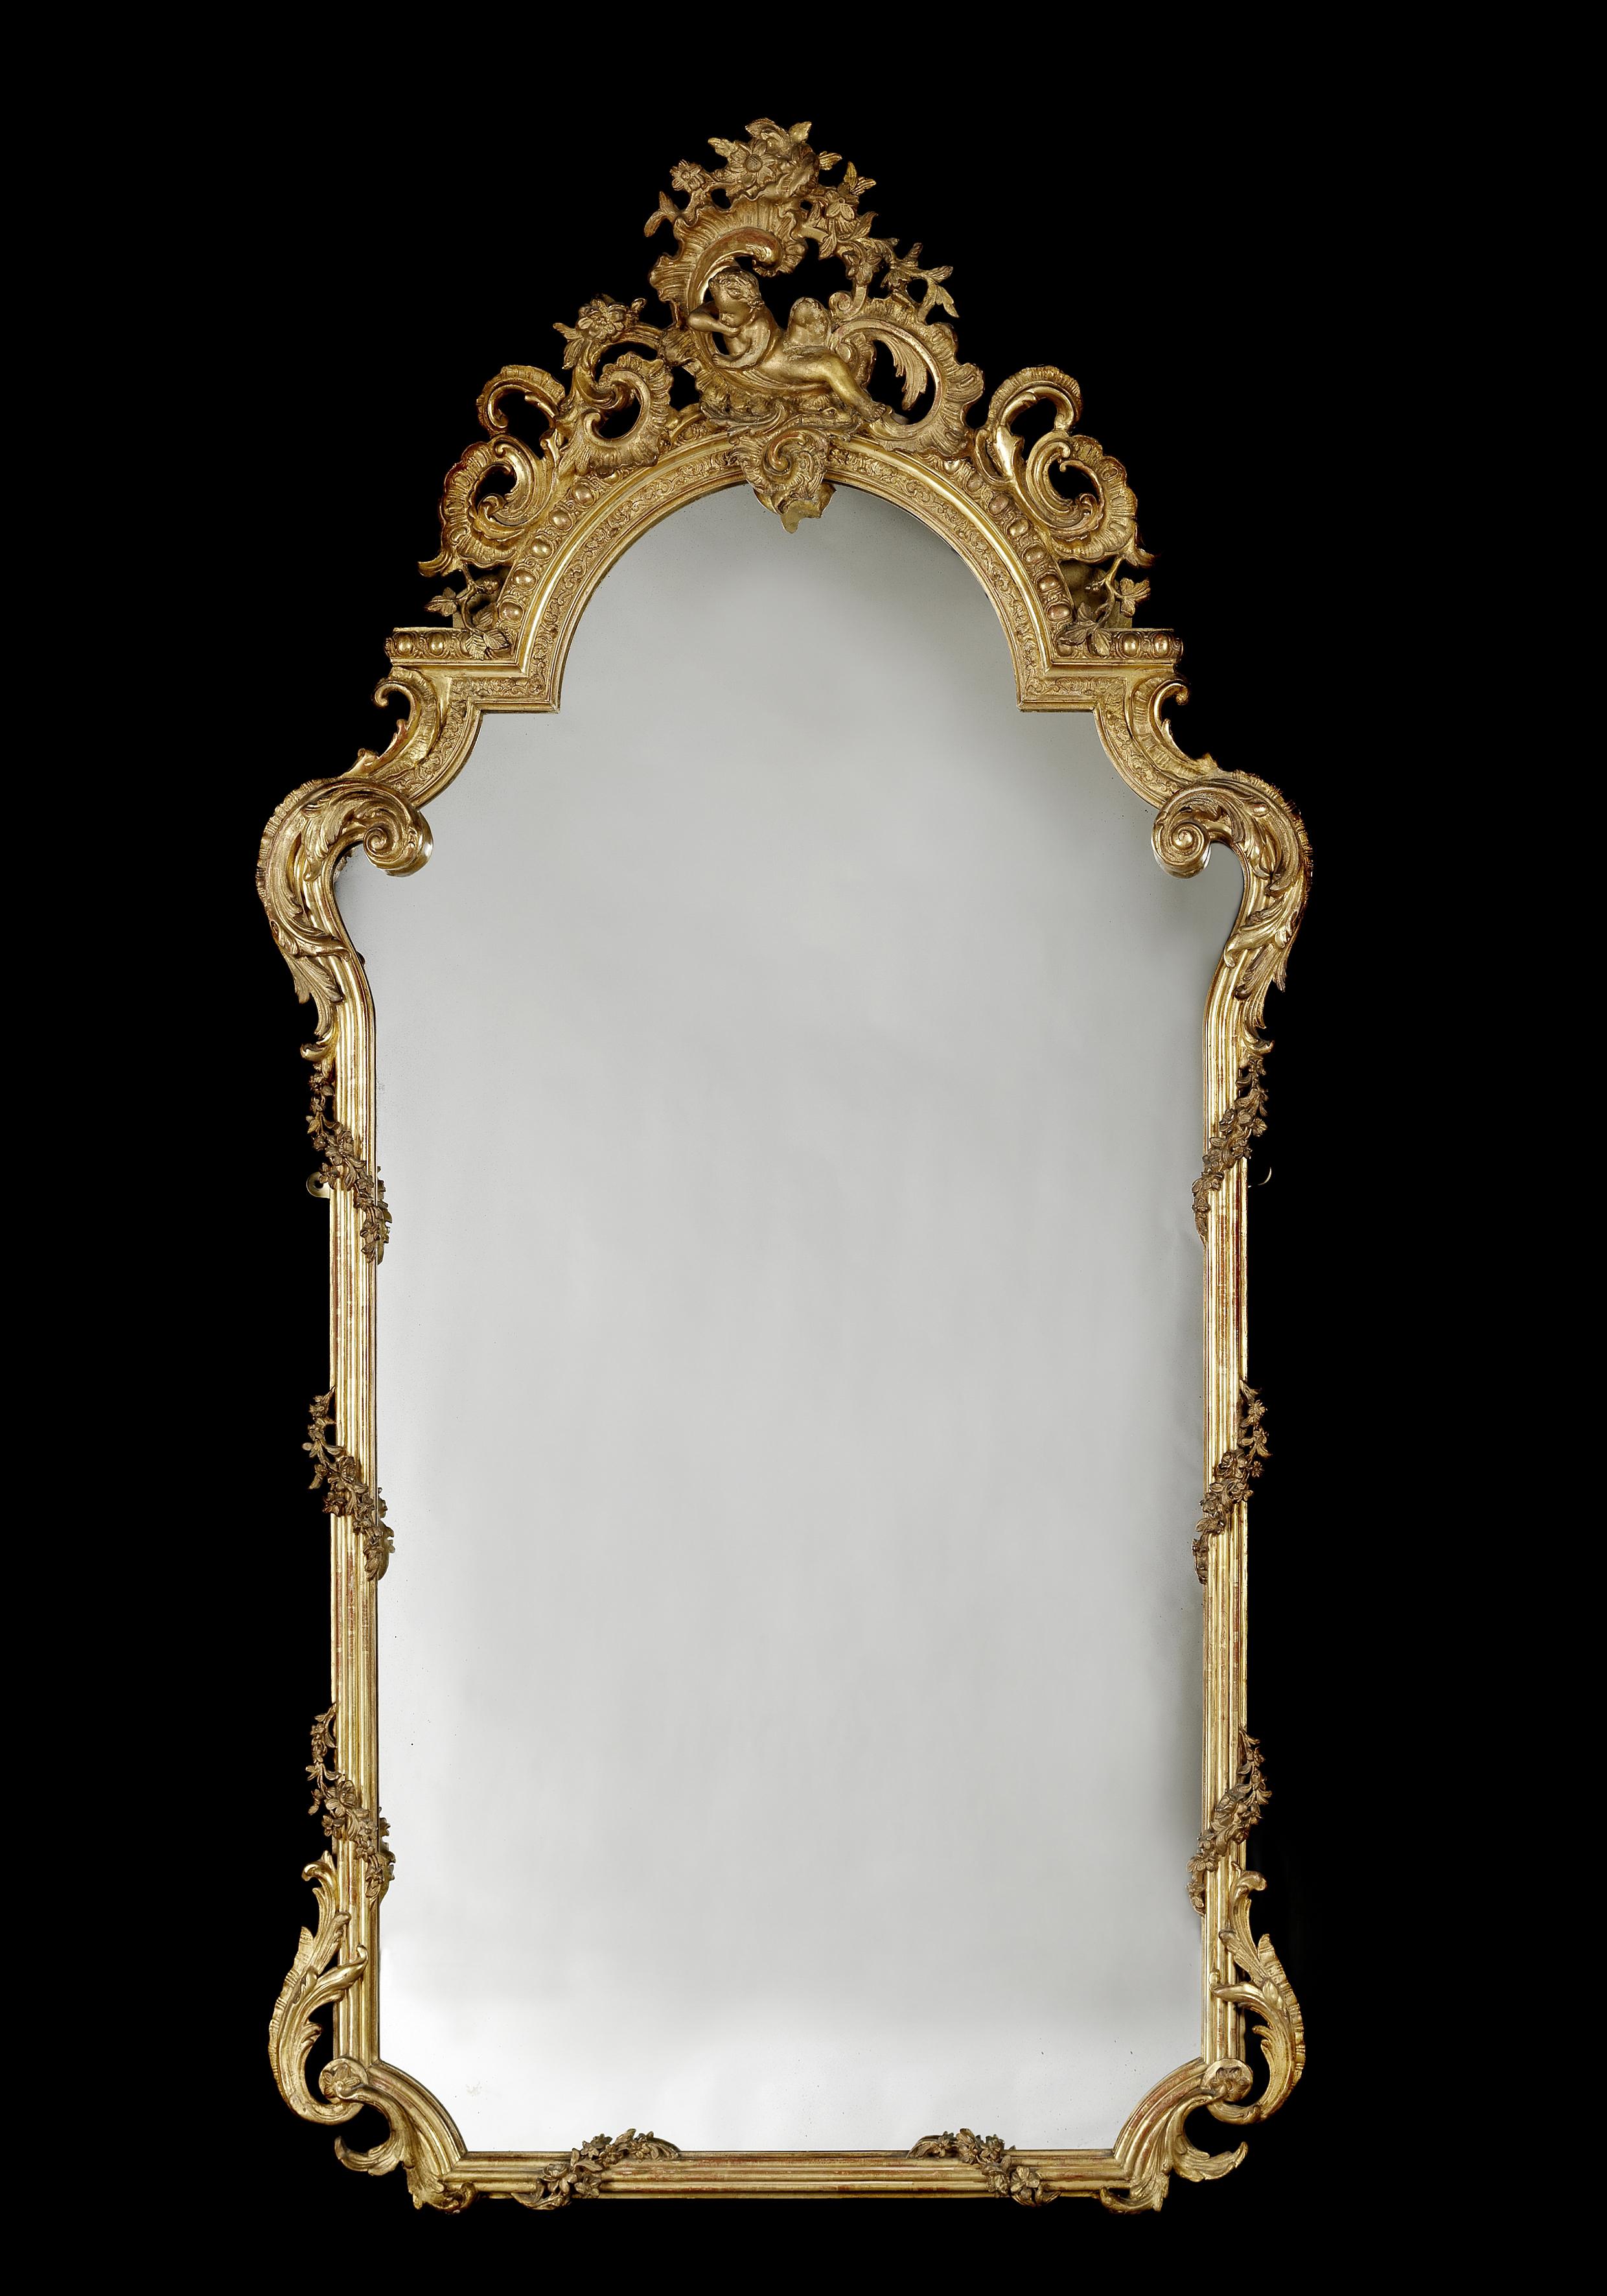 A fine and tall Louis XV style carved giltwood mirror. 

French, circa 1870.

This very finely carved mirror has an arched cresting expressively carved with acanthus ‘C’-Scrolls and rock roses centred by a reclining putti. The reeded uprights